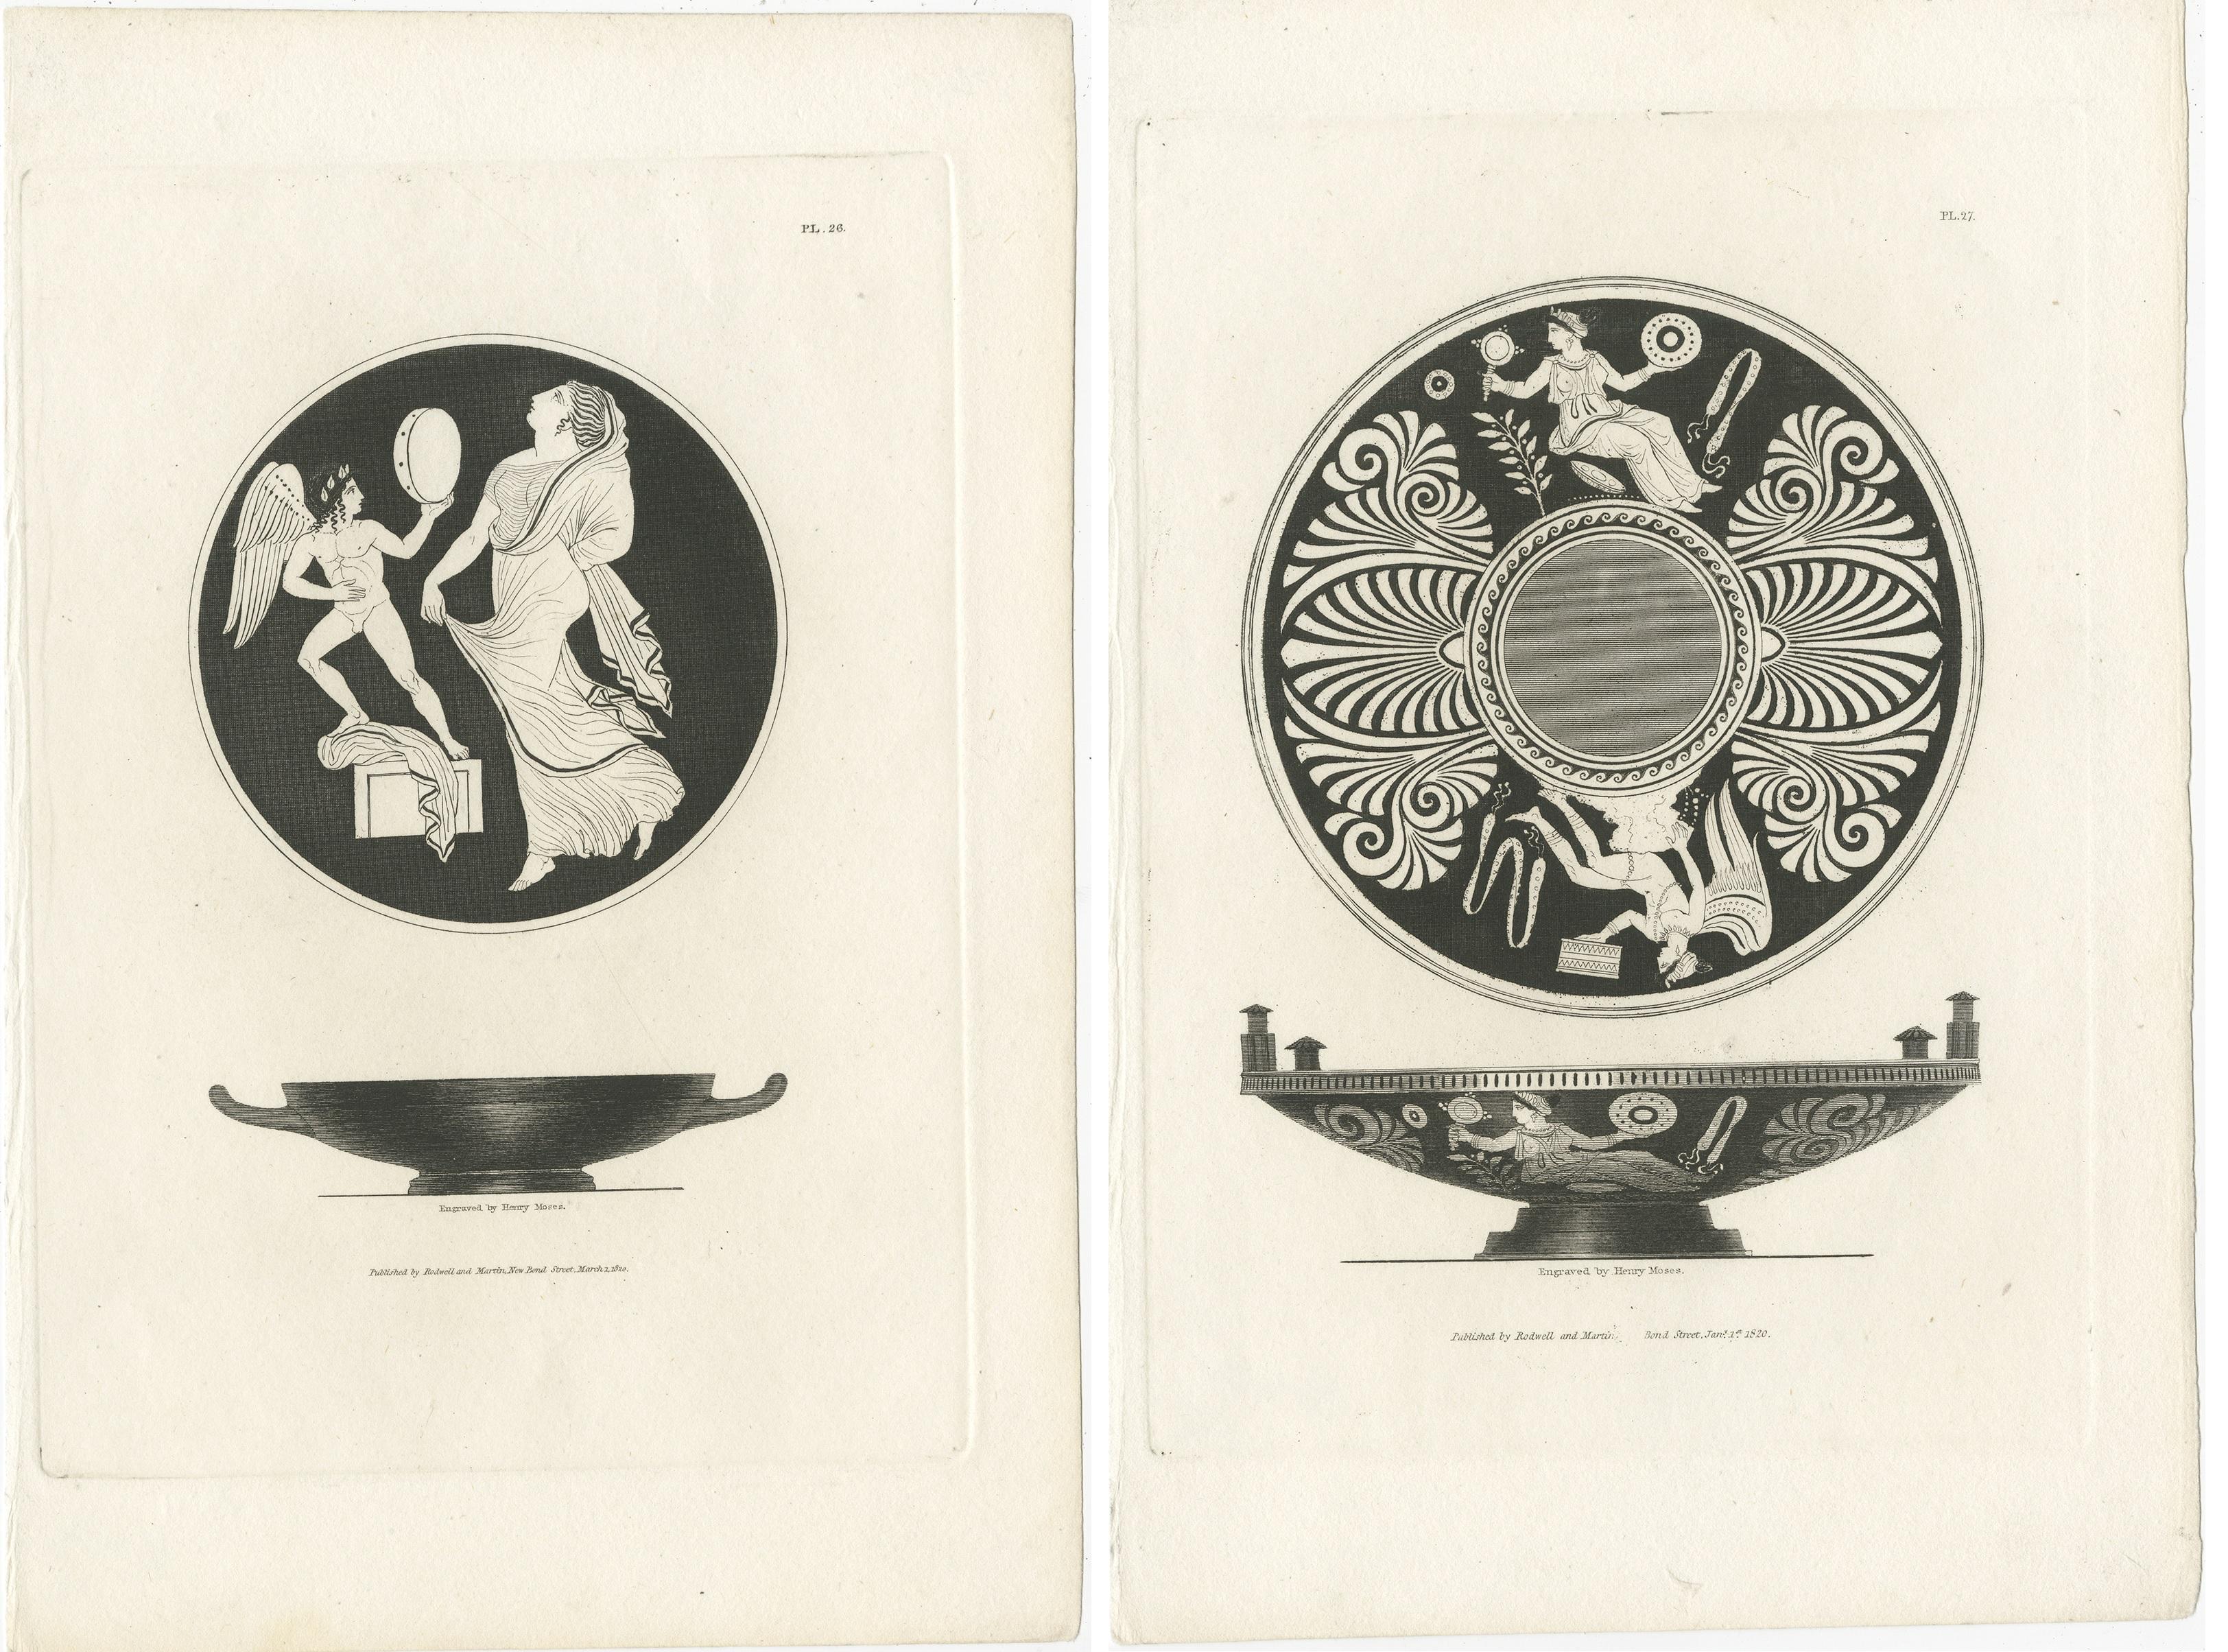 19th Century Set of 2 Antique Prints Depicting the Design of Vases/Plates by Moses, 1820 For Sale